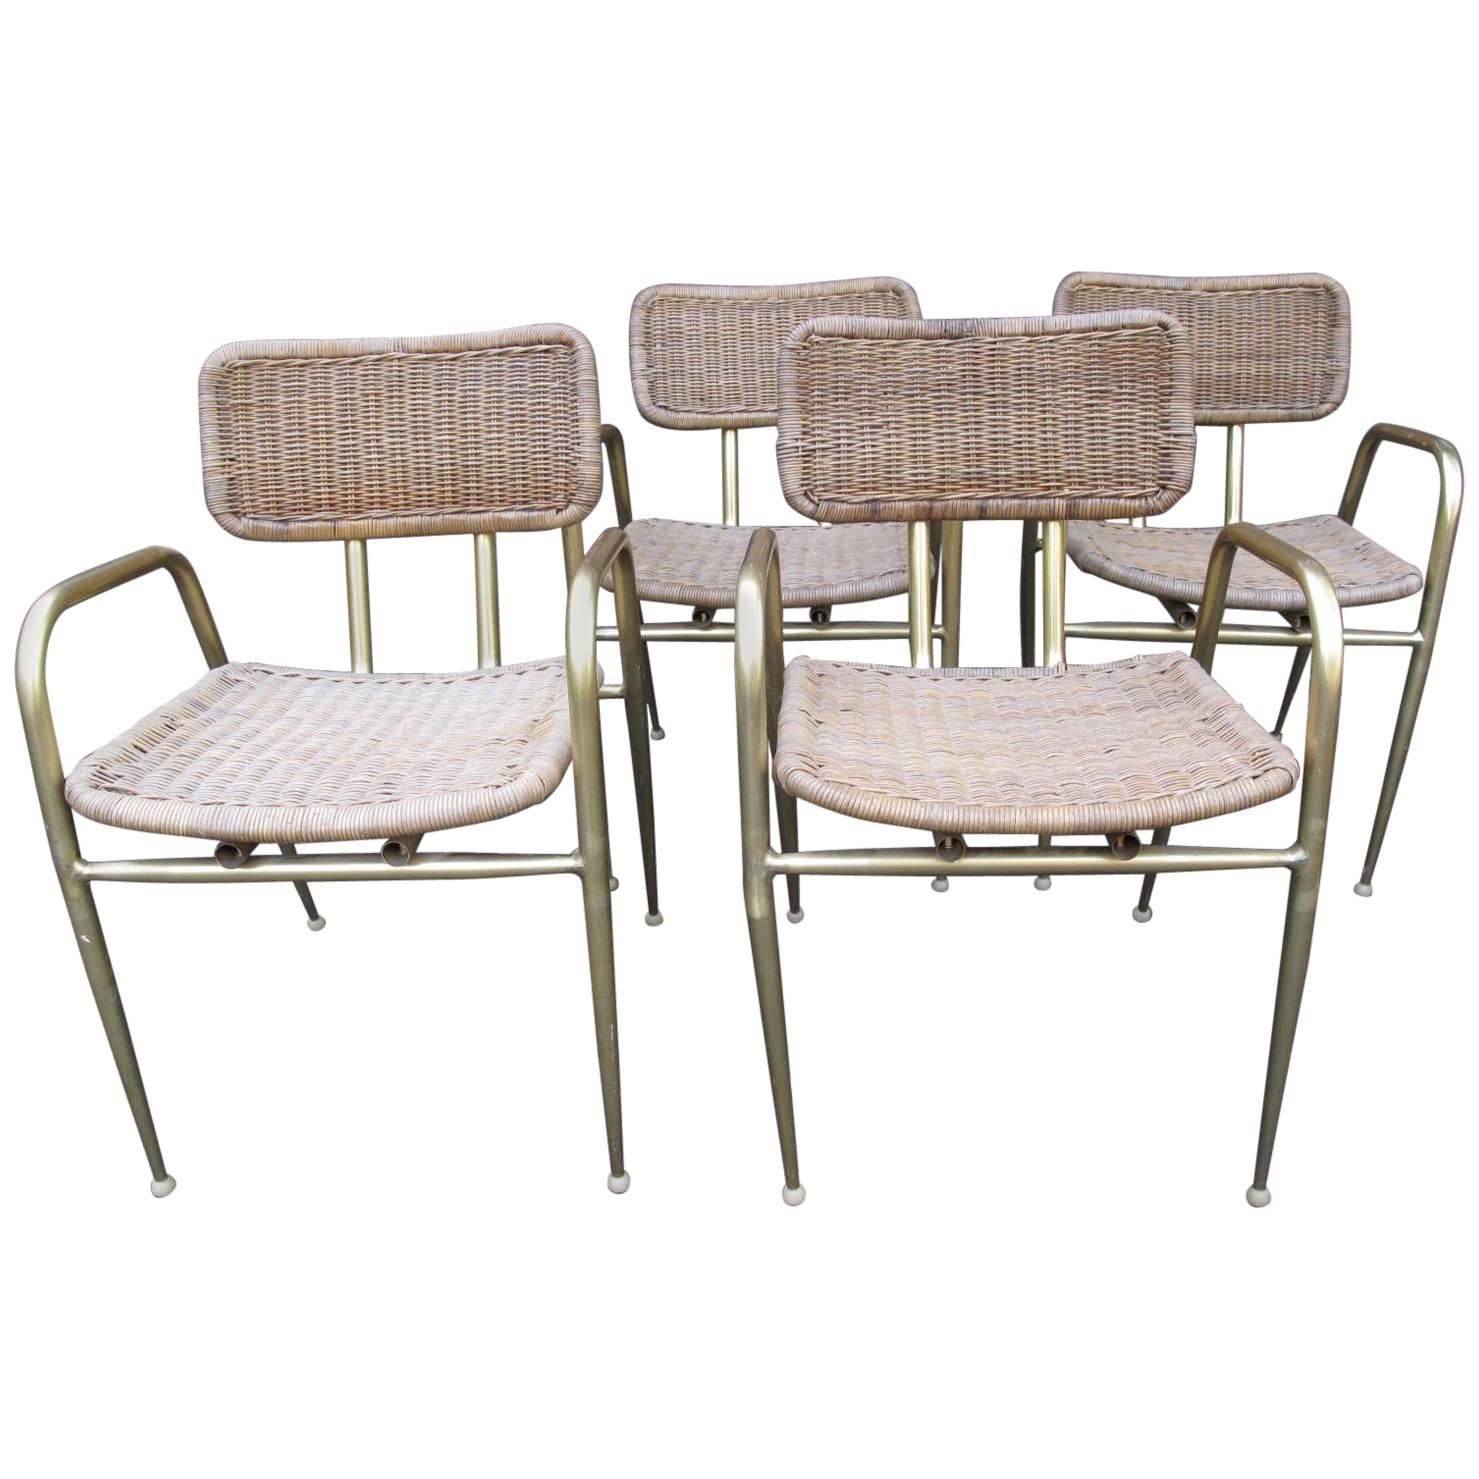 Set of Four Wicker Chairs by Troy Sunshade